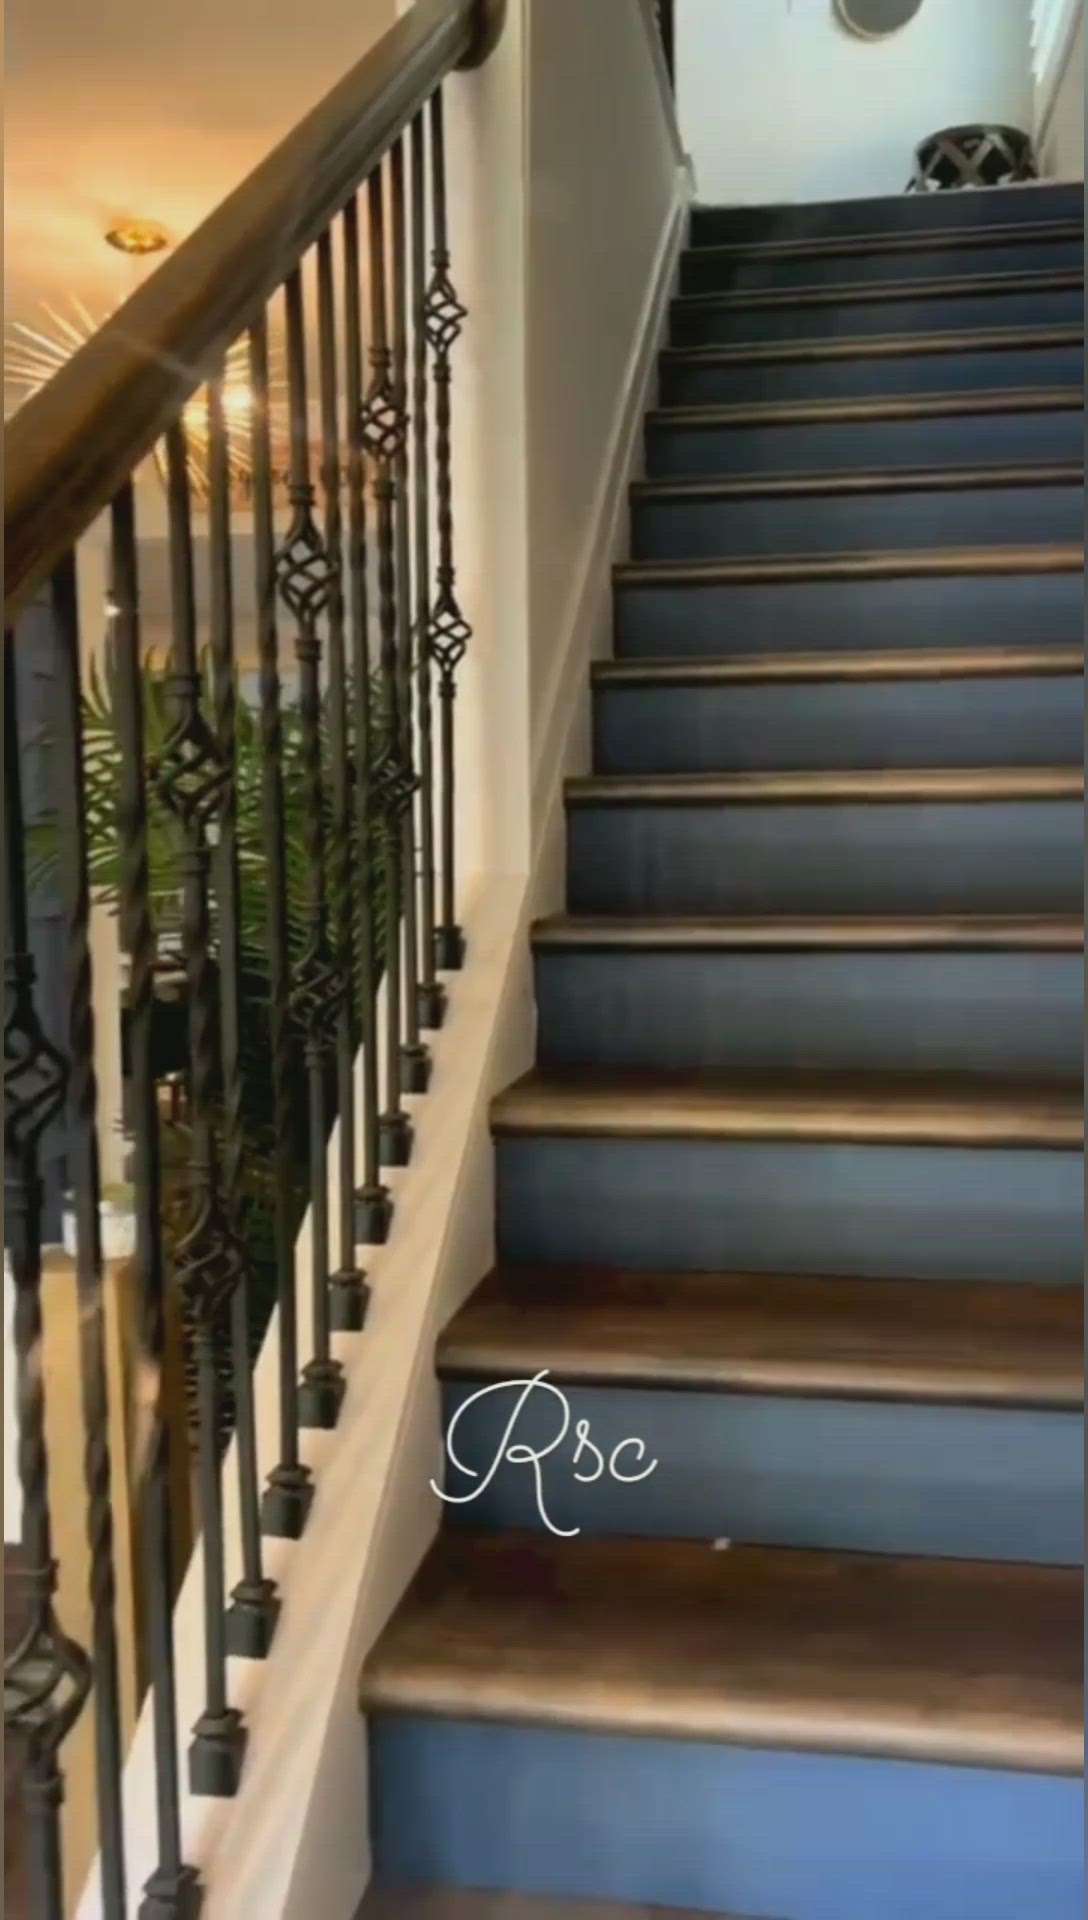 Wooden staircase with perfectly finished railings.
Wall Panels, ceiling and much more. 
Ring us up! 
#construction #constructioncompany #civilengineer #civilwork #rmc #cement #slabconcretingwork #slabcasting #wallputty #koloviral #koloapp #koloofficial #kolokitchenideas #kolotrending  #wallplaster #brickwork #concreteblock #AACblock #homepainting #painting #murals #trending #hashtag #hashtags #centring #plycentring #building #garden #landscaping #plants #wallpaper #aluminumpartition #wooden #woodenwork #acp #wpc #HPL #mdf #newdesigns #creative #walltrim #louvre  #sensorlights #frenchwindows #chandelier  #tvpanel #wainscoat #attractive #cooldesign  #architecture  #interiordesign #interiordesignstudio #trendingdesigns   #bhopalcontractor   #interior_designer_in_bhopal #bhopalinteriors #bhopalfurniture #radiantstarconstruction